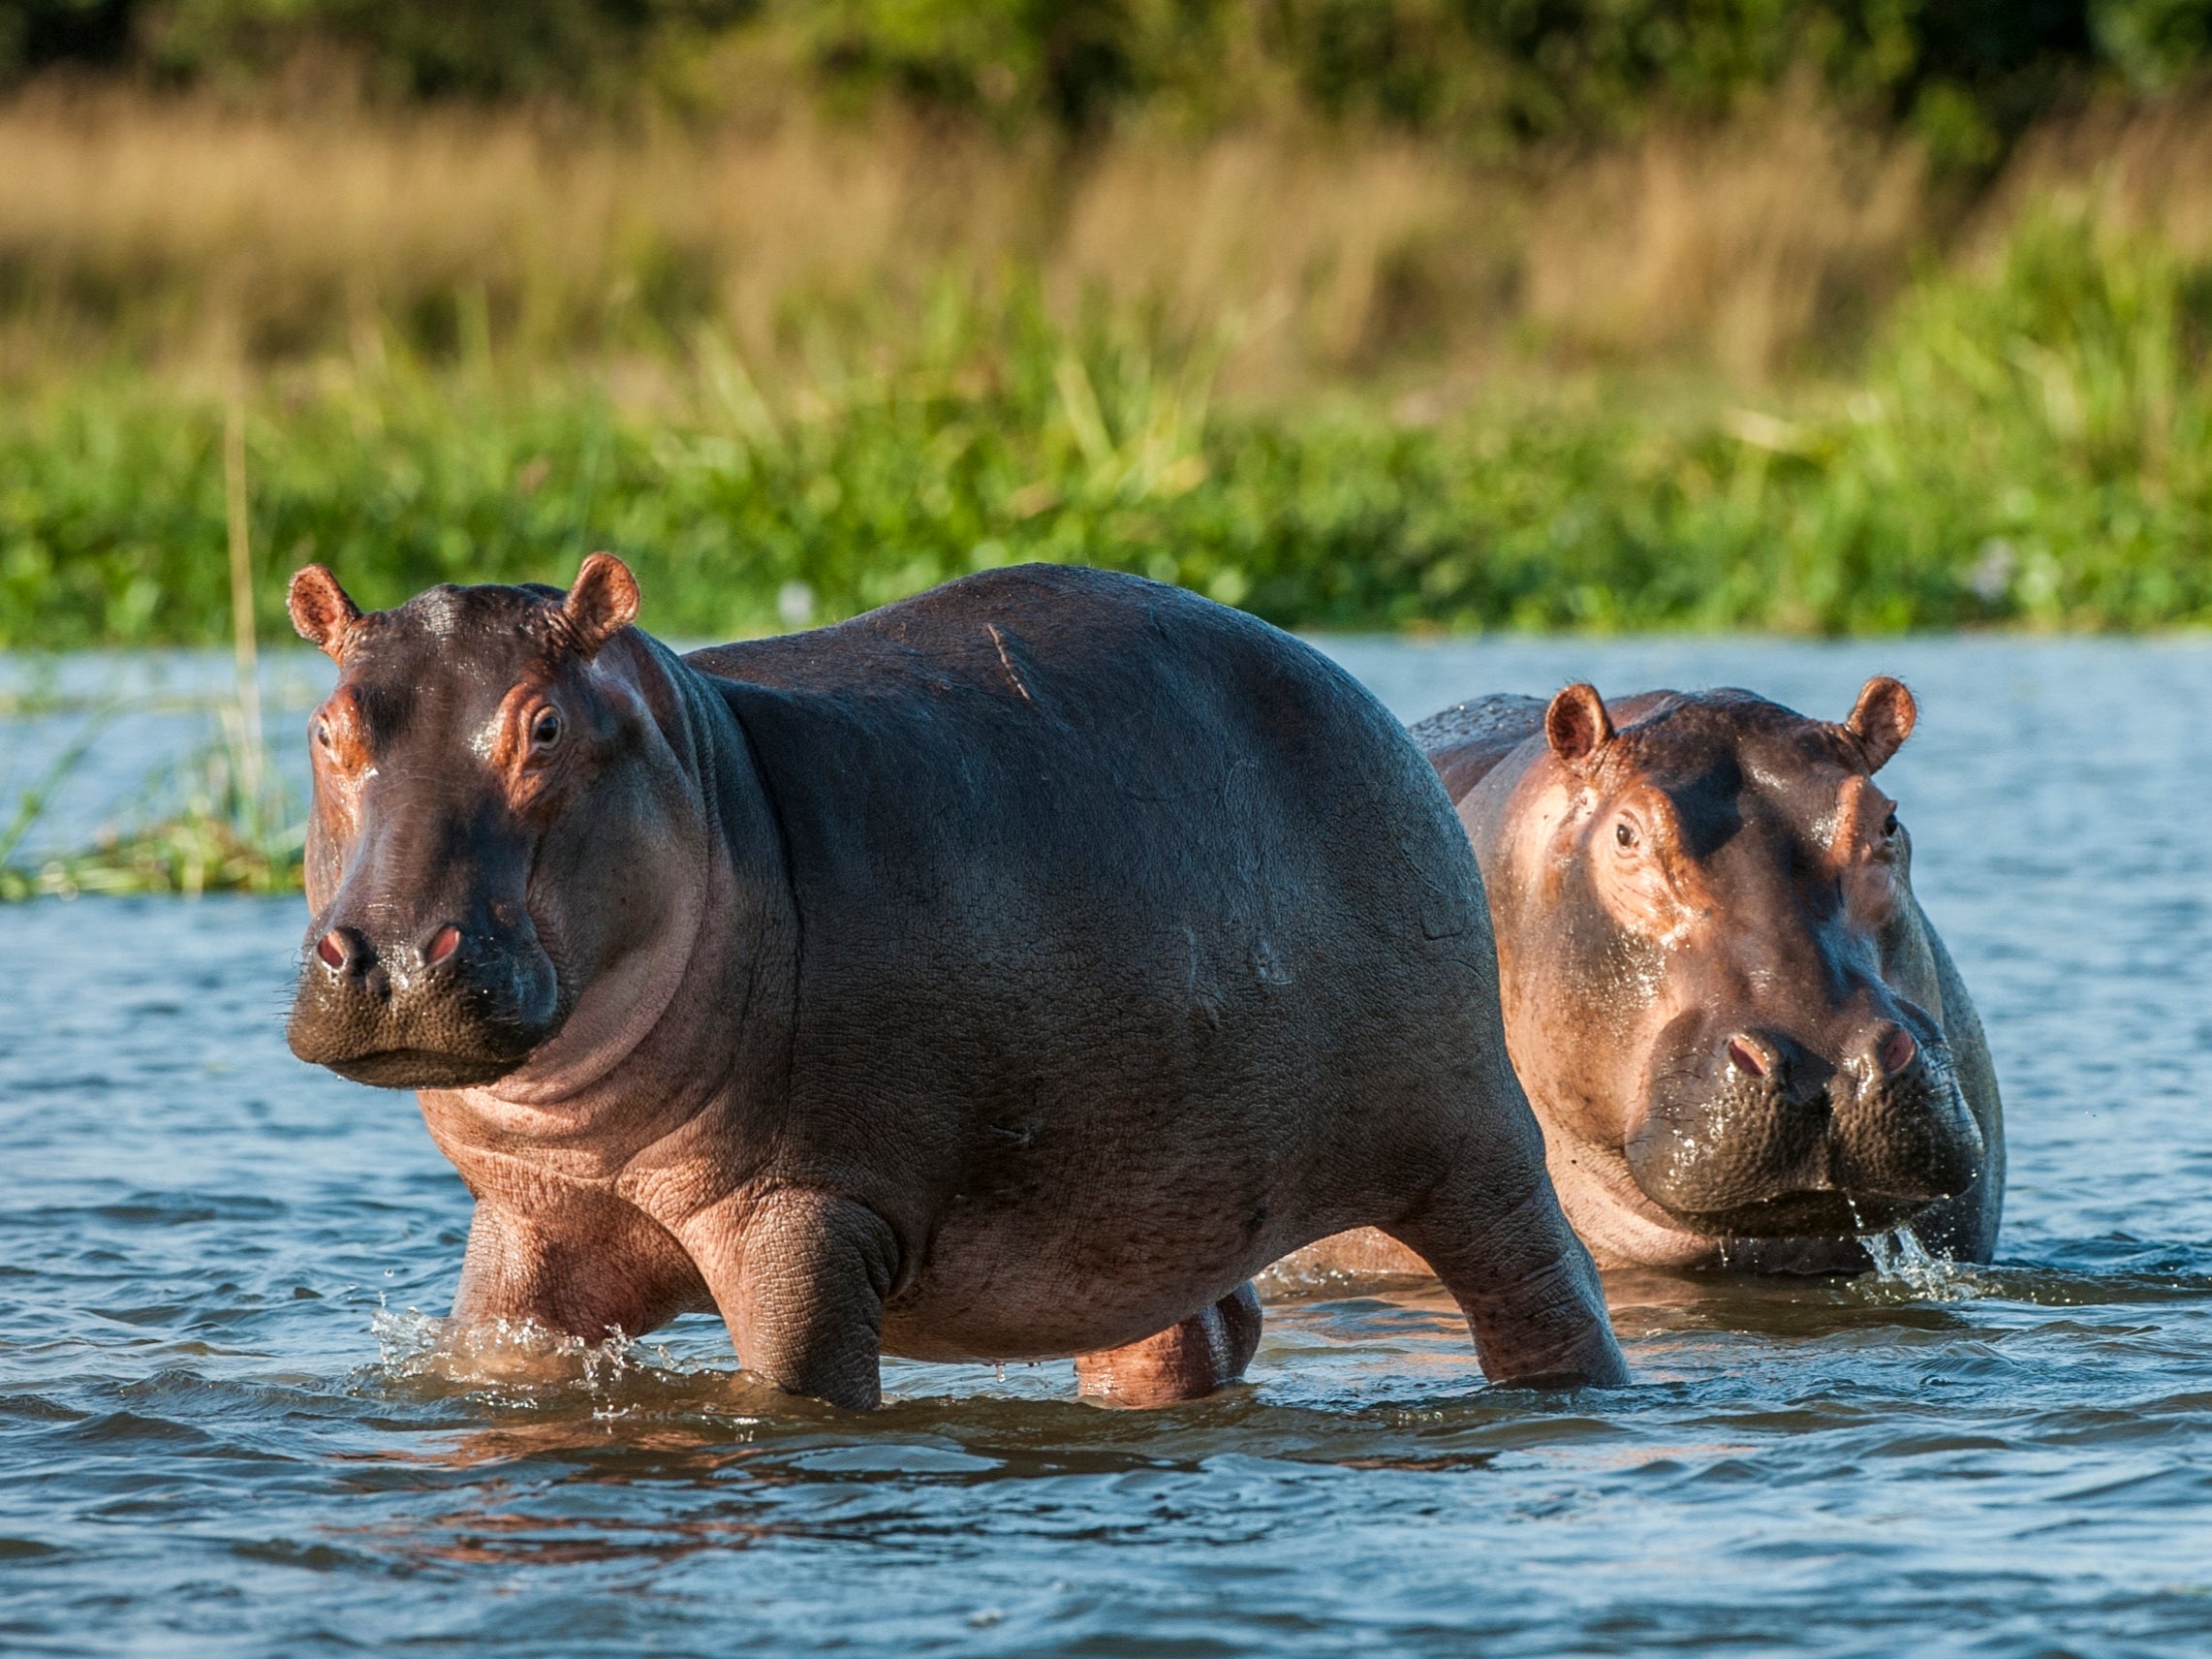 Hippopotamus is the biggest animal in the world after elephant, rhinoceros